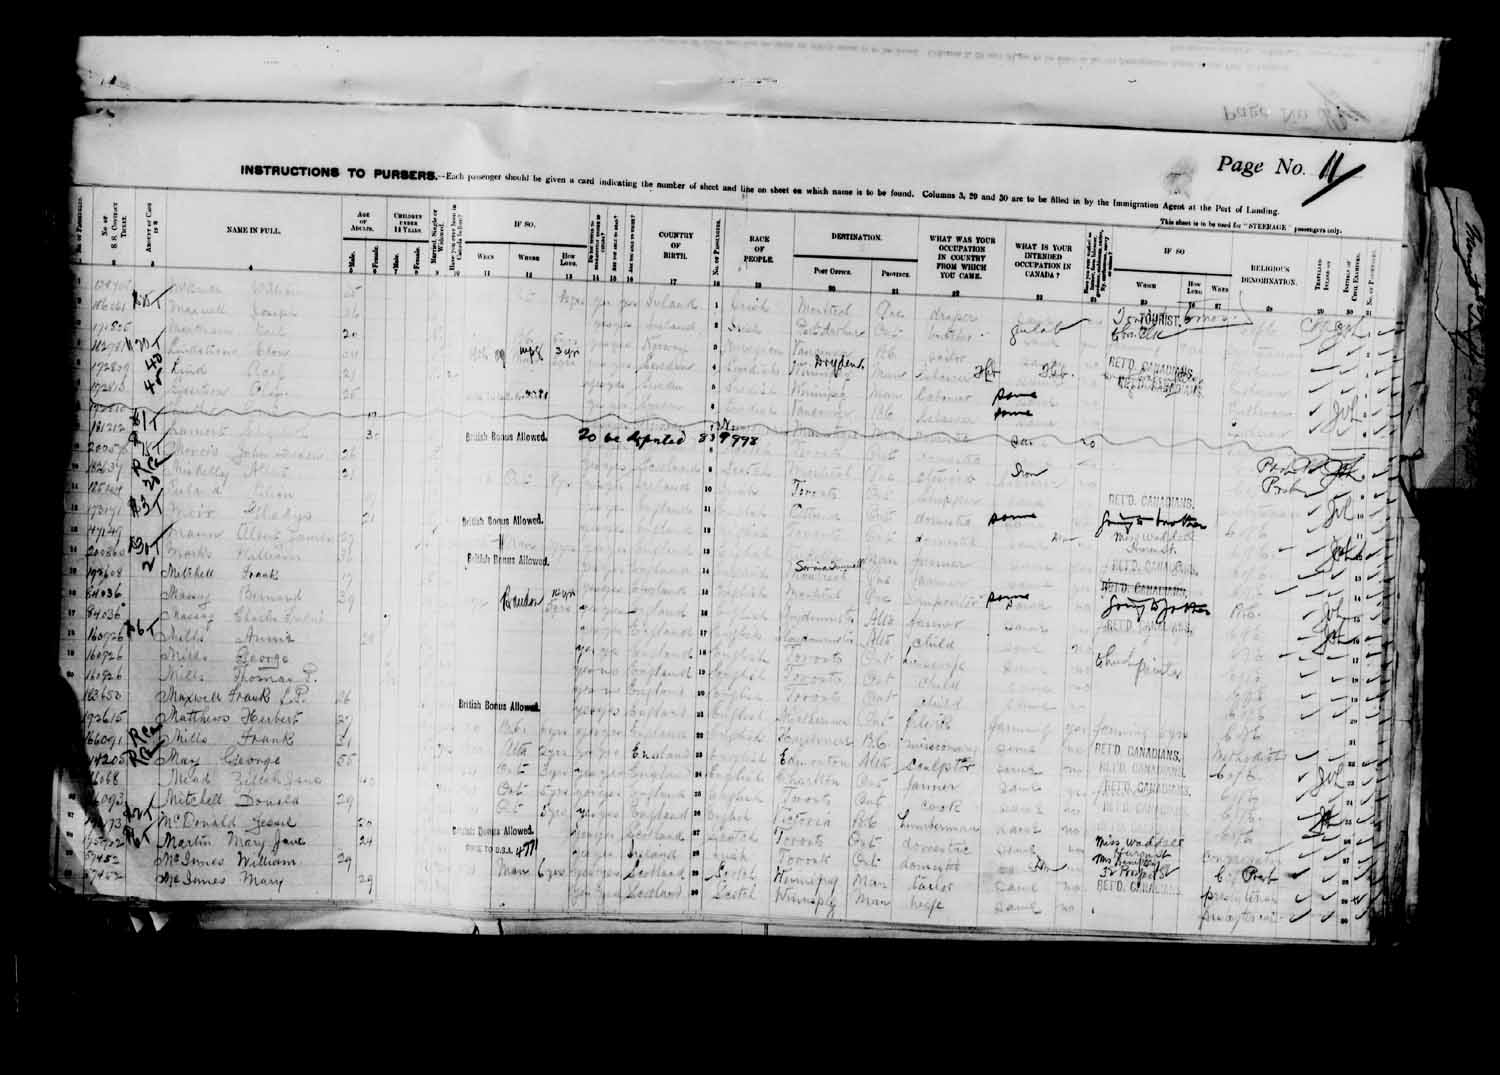 Digitized page of Passenger Lists for Image No.: e003627200